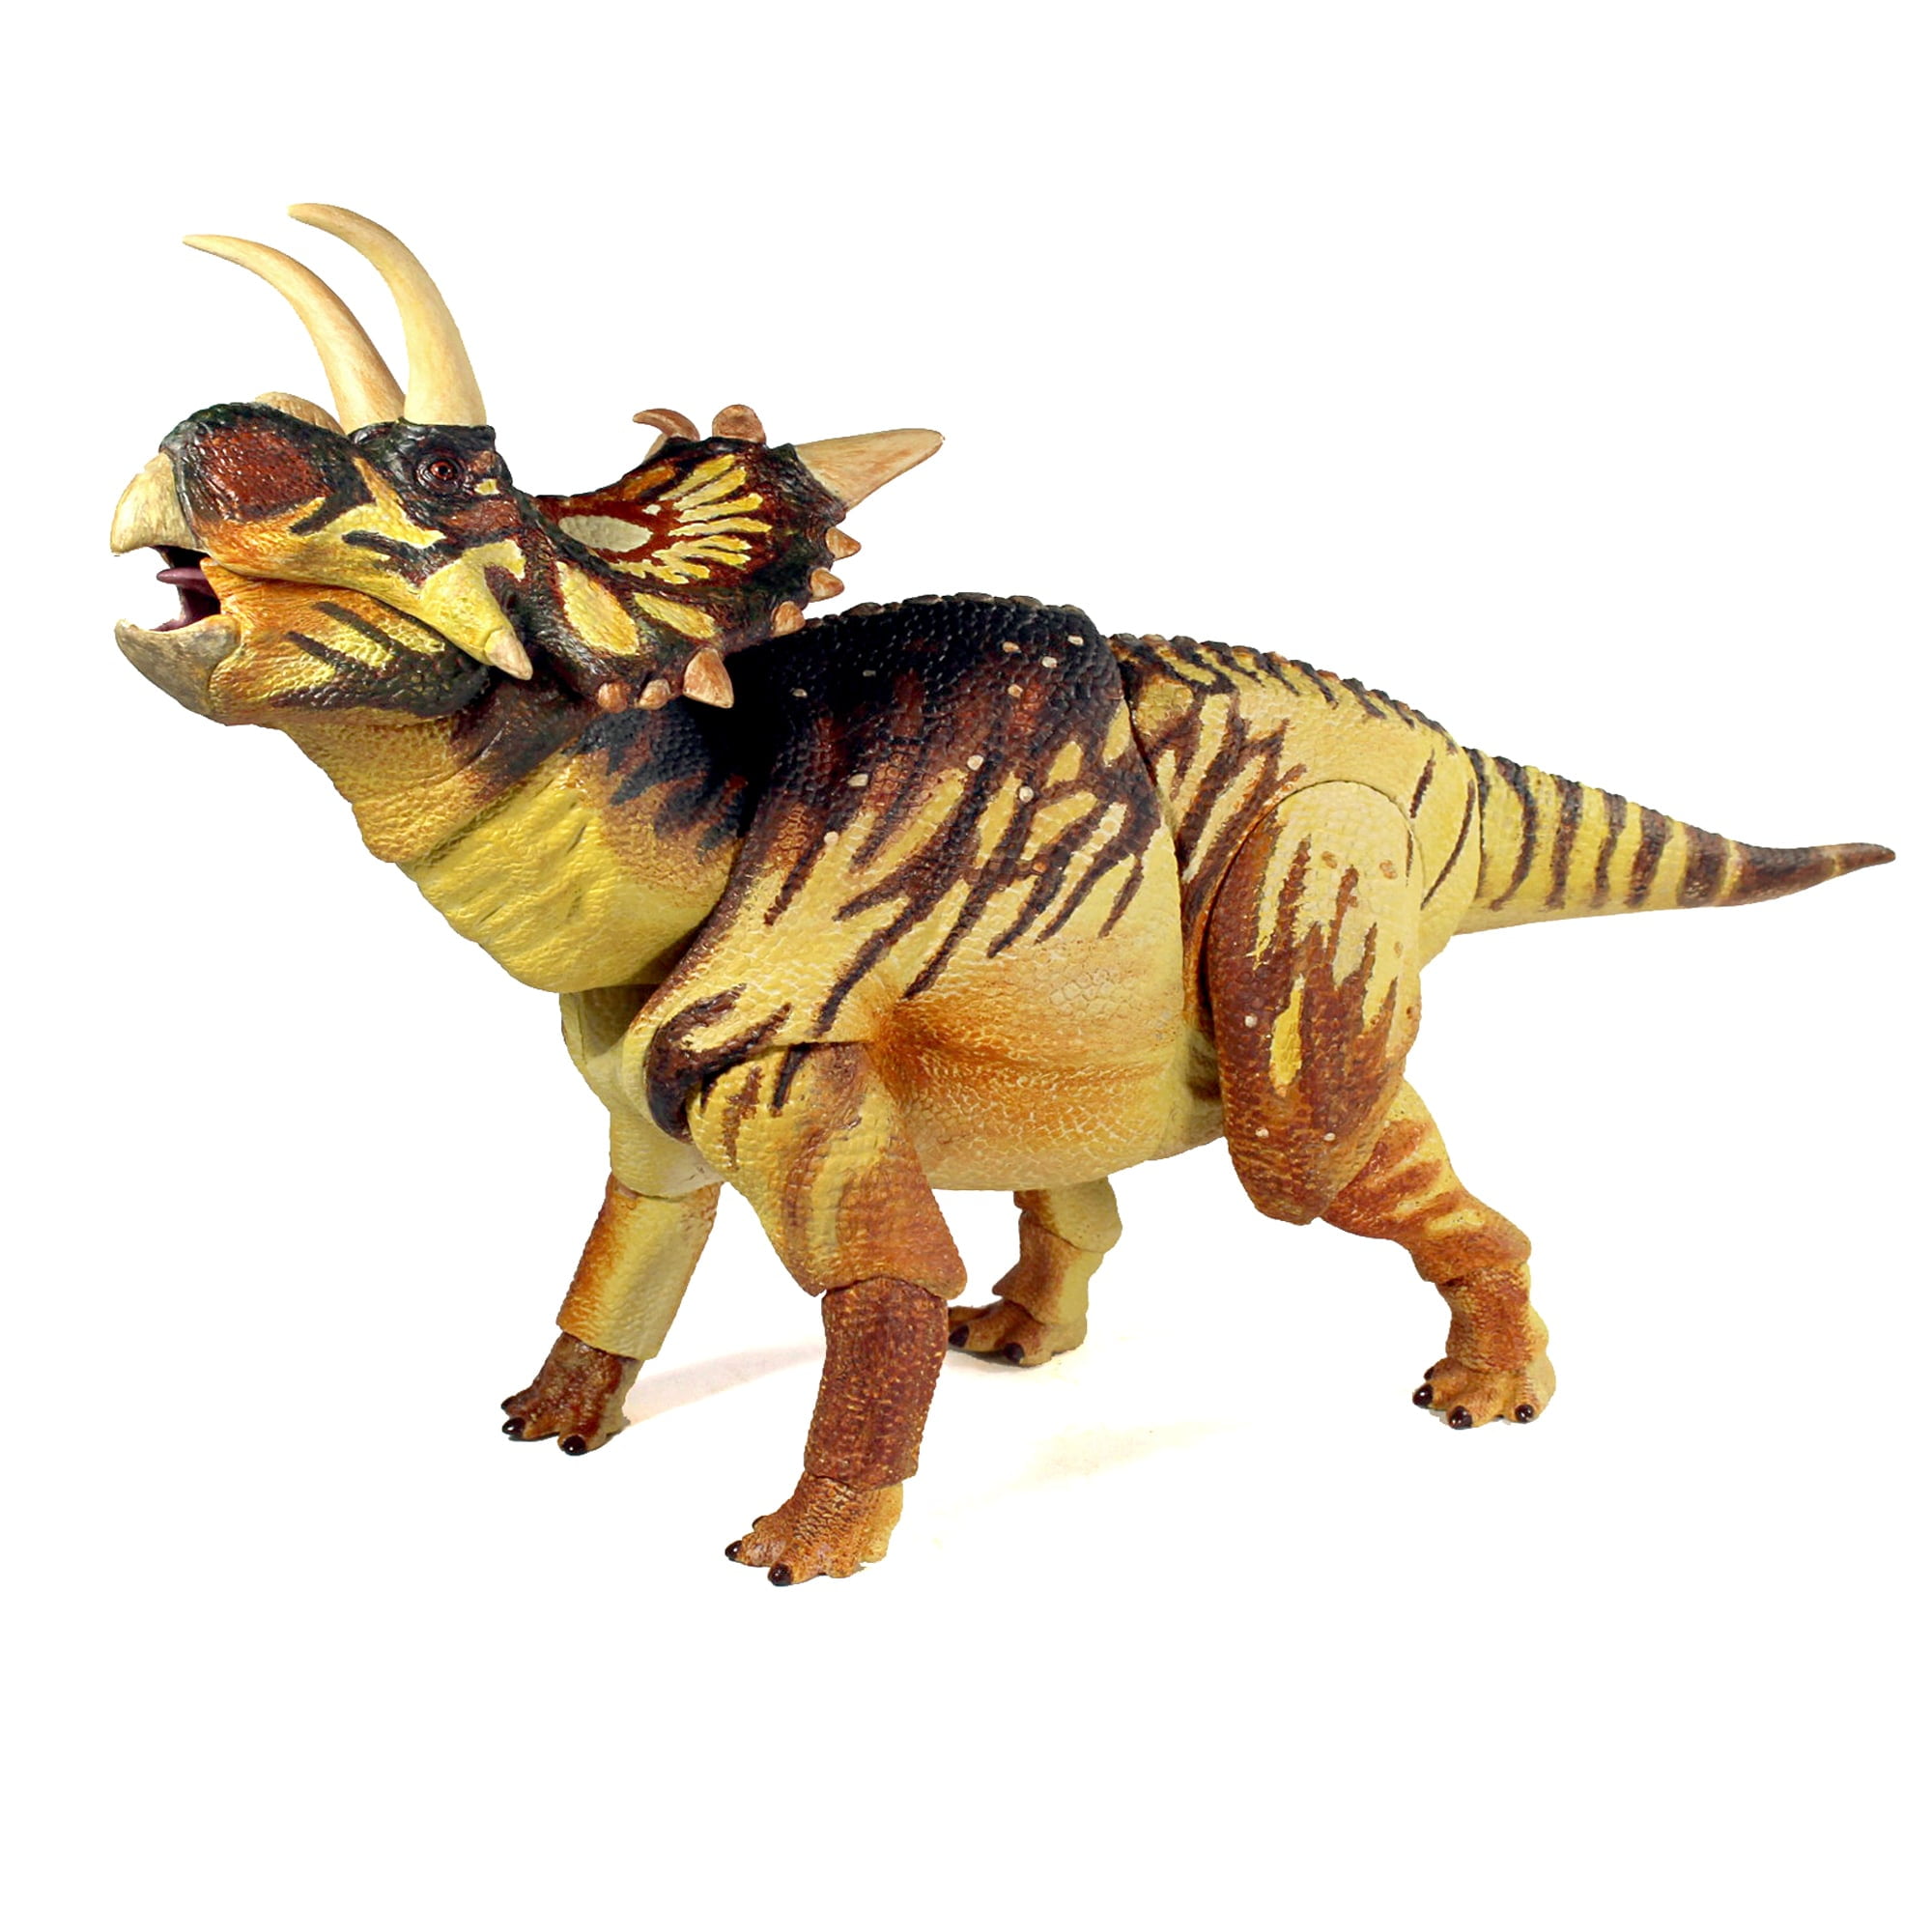 Beasts Of The Mesozoic: Xenoceratops Foremostensis- 1/18th Scale Dinosaur  Action Figure - 14